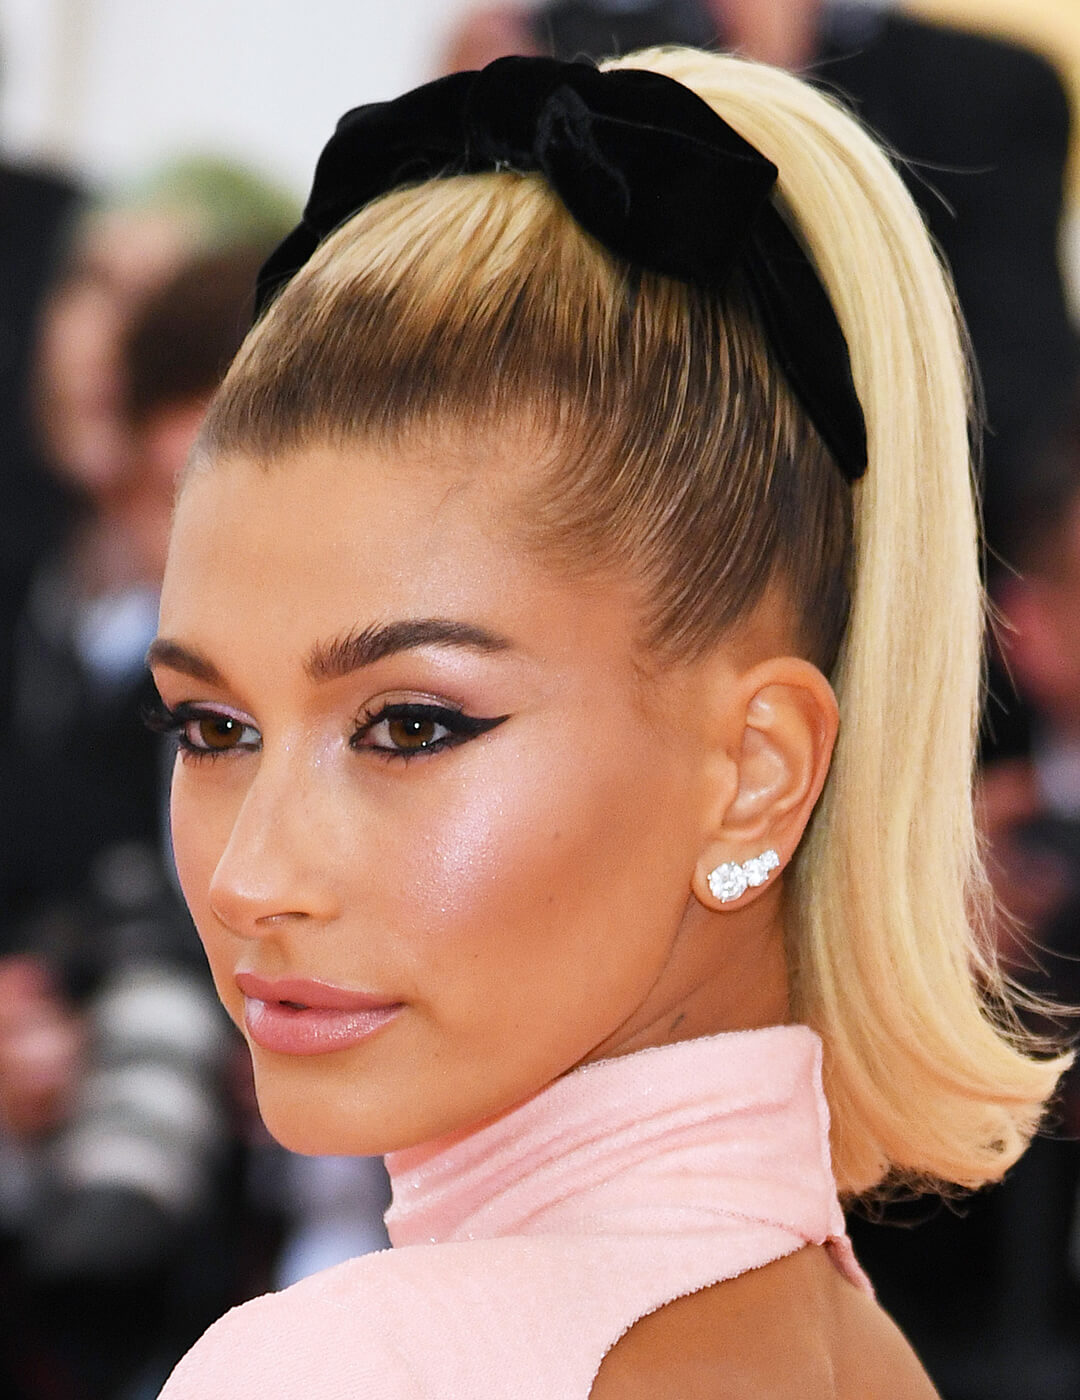 Hailey Bieber rocking a sleek, high ponytail hairstyle, bold winged eyeliner makeup look, diamond earrings, and pink dress